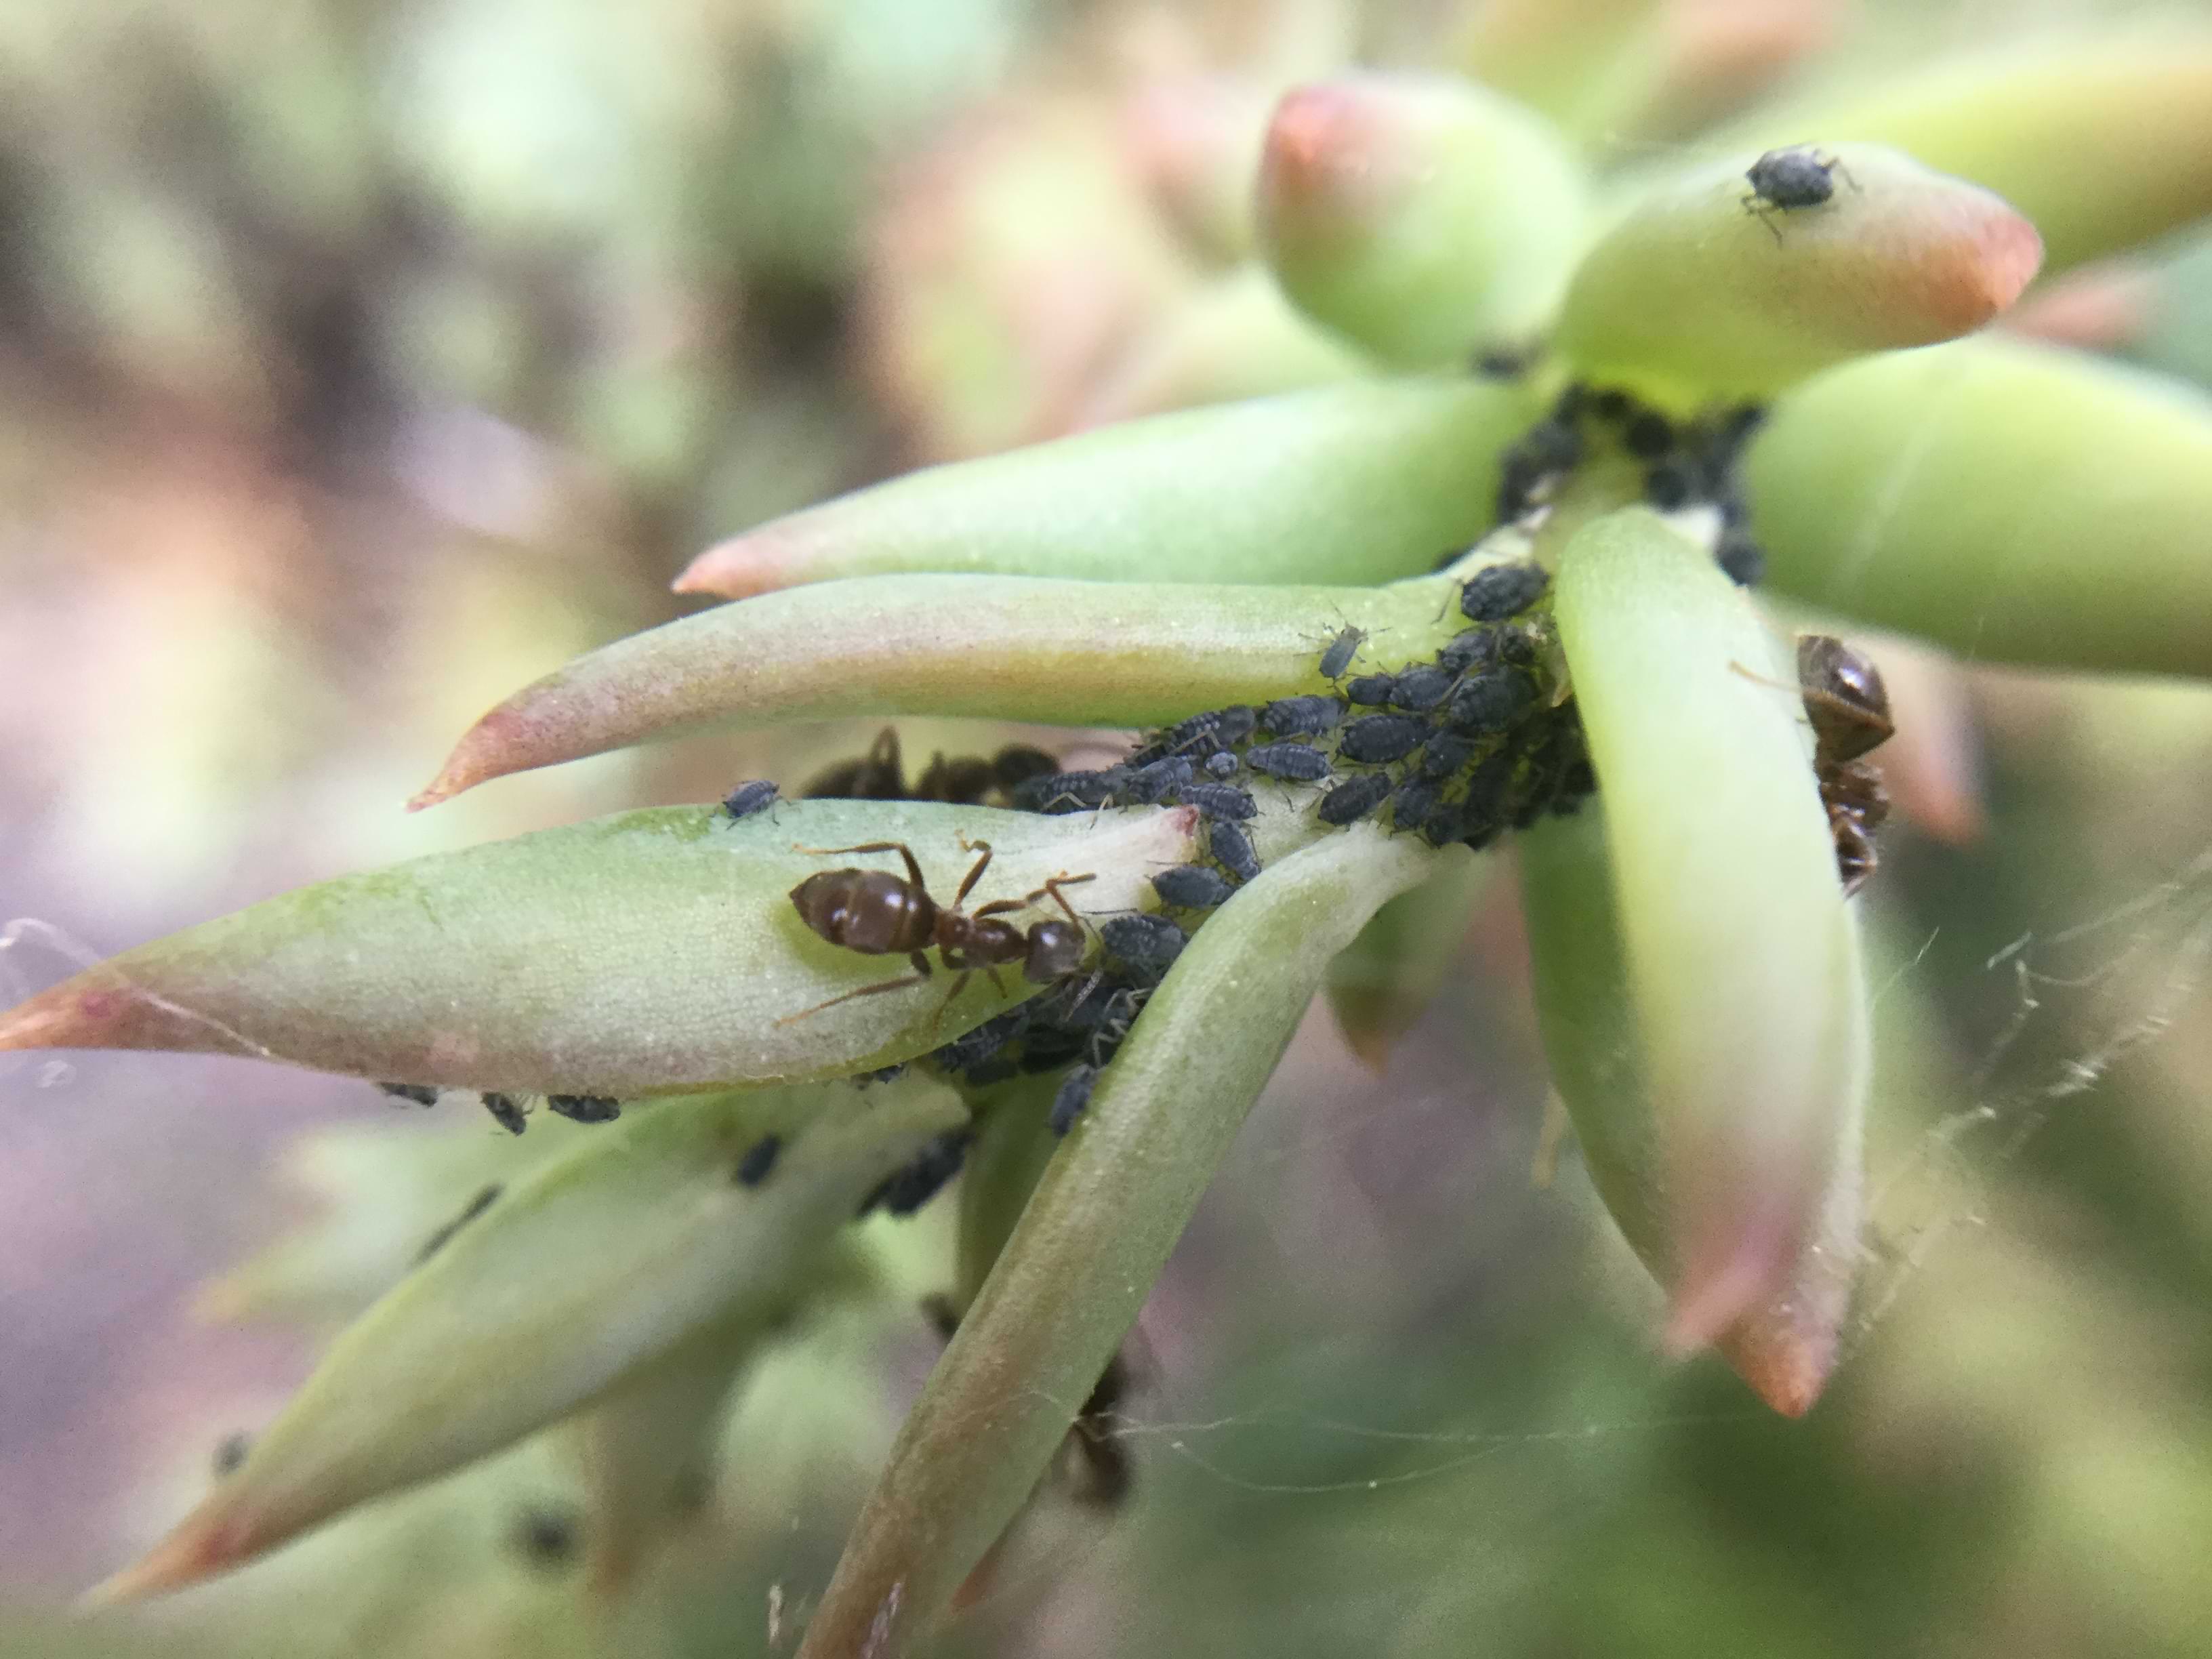 A large number of black aphids crowded around the stem of a thick plant. They have lighter coloured segments running across their abdomen and two antennae that point backwards. A few red ants are visible here too.